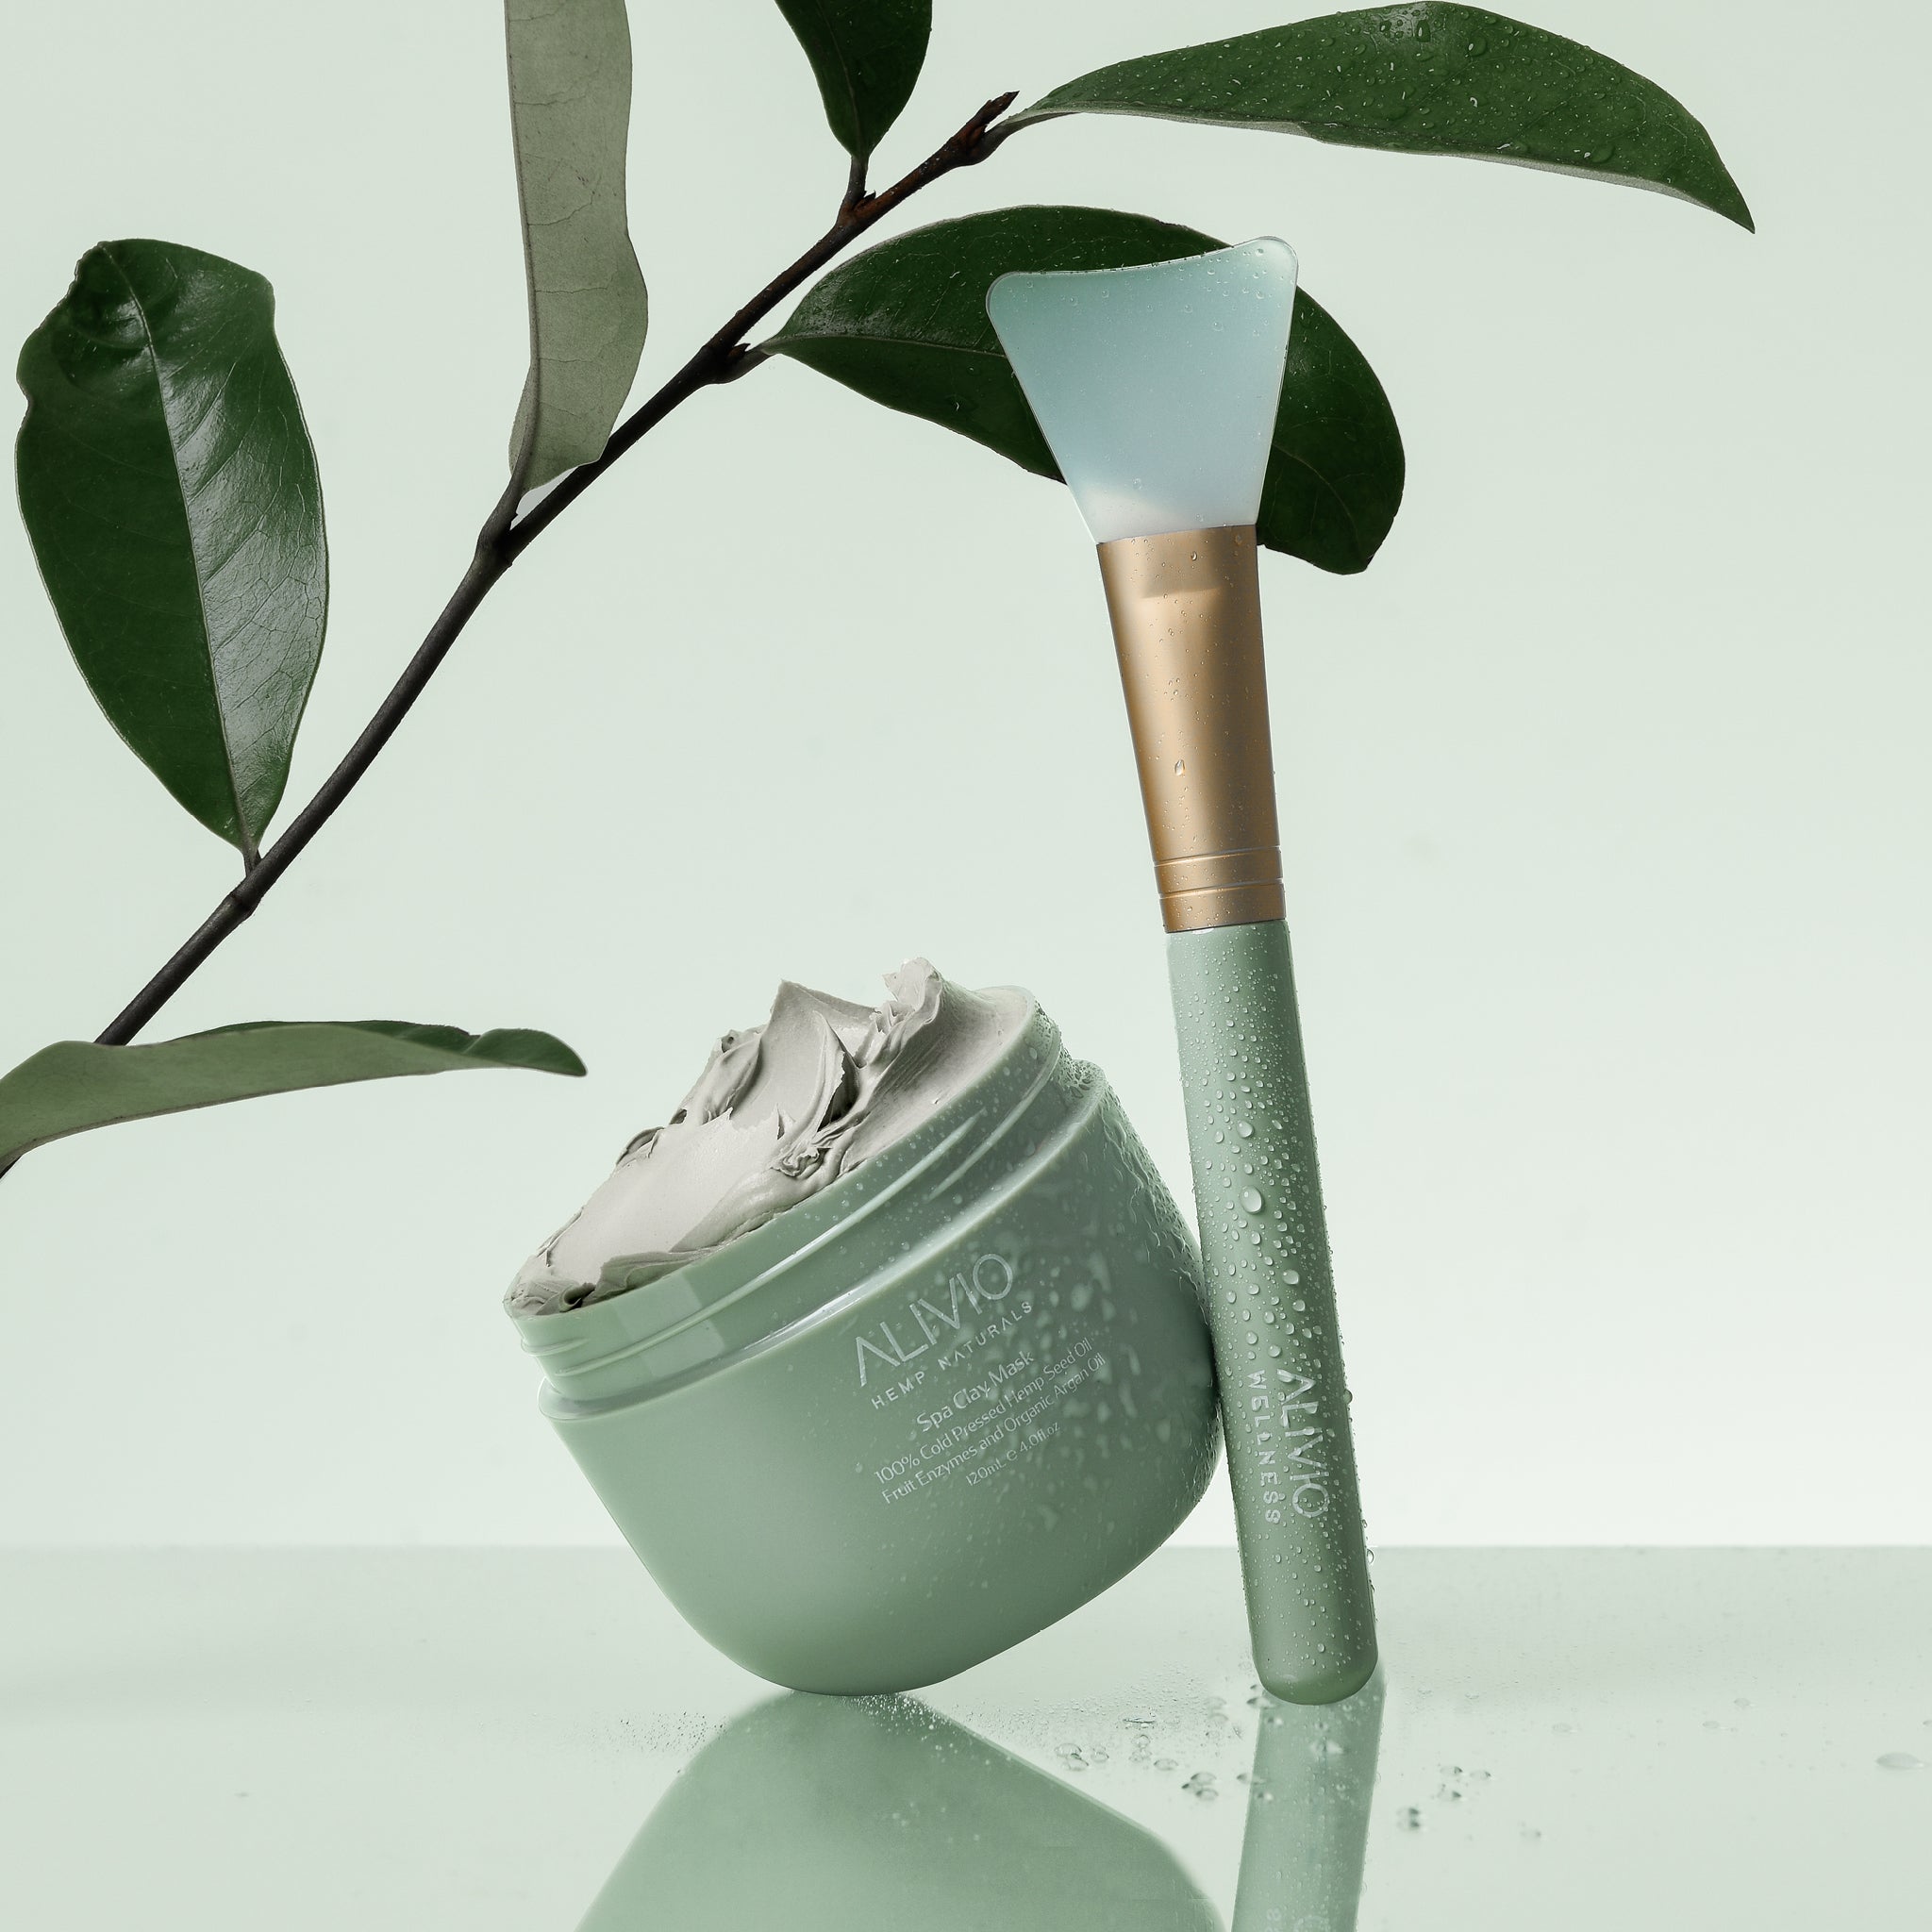 Open tub of green clay mask with brush and leaf